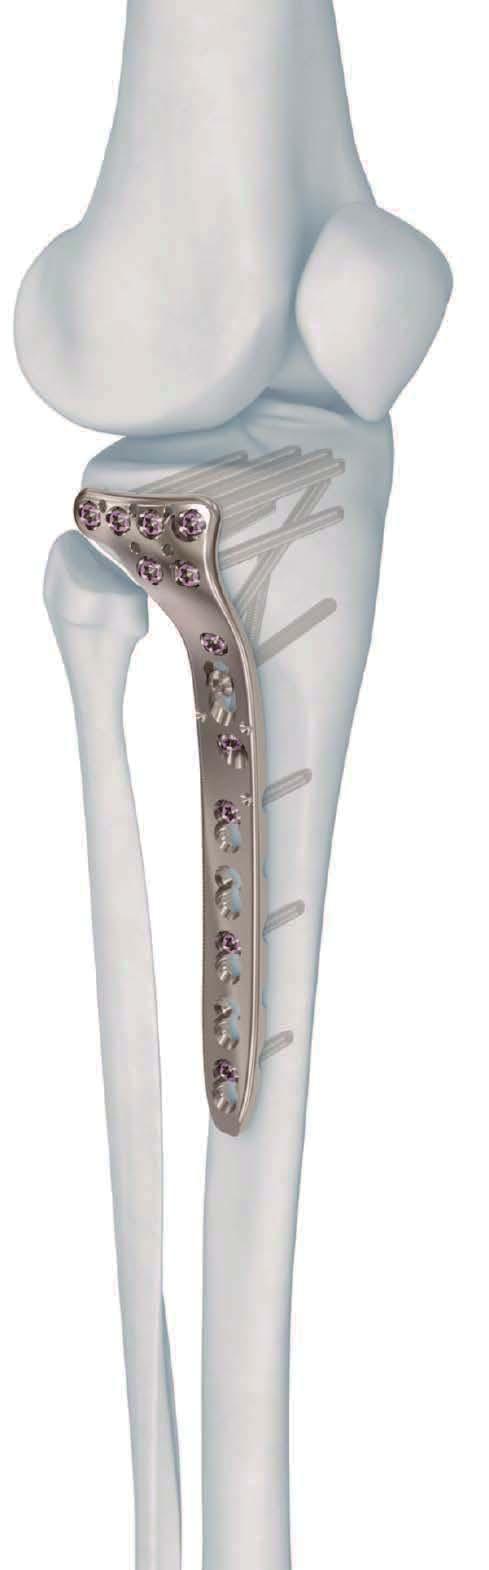 3.5 MM VA-LCP PROXIMAL TIBIA PLATE SYSTEM. Part of the Variable Angle Periarticular Plating System. The DePuy Synthes 3.